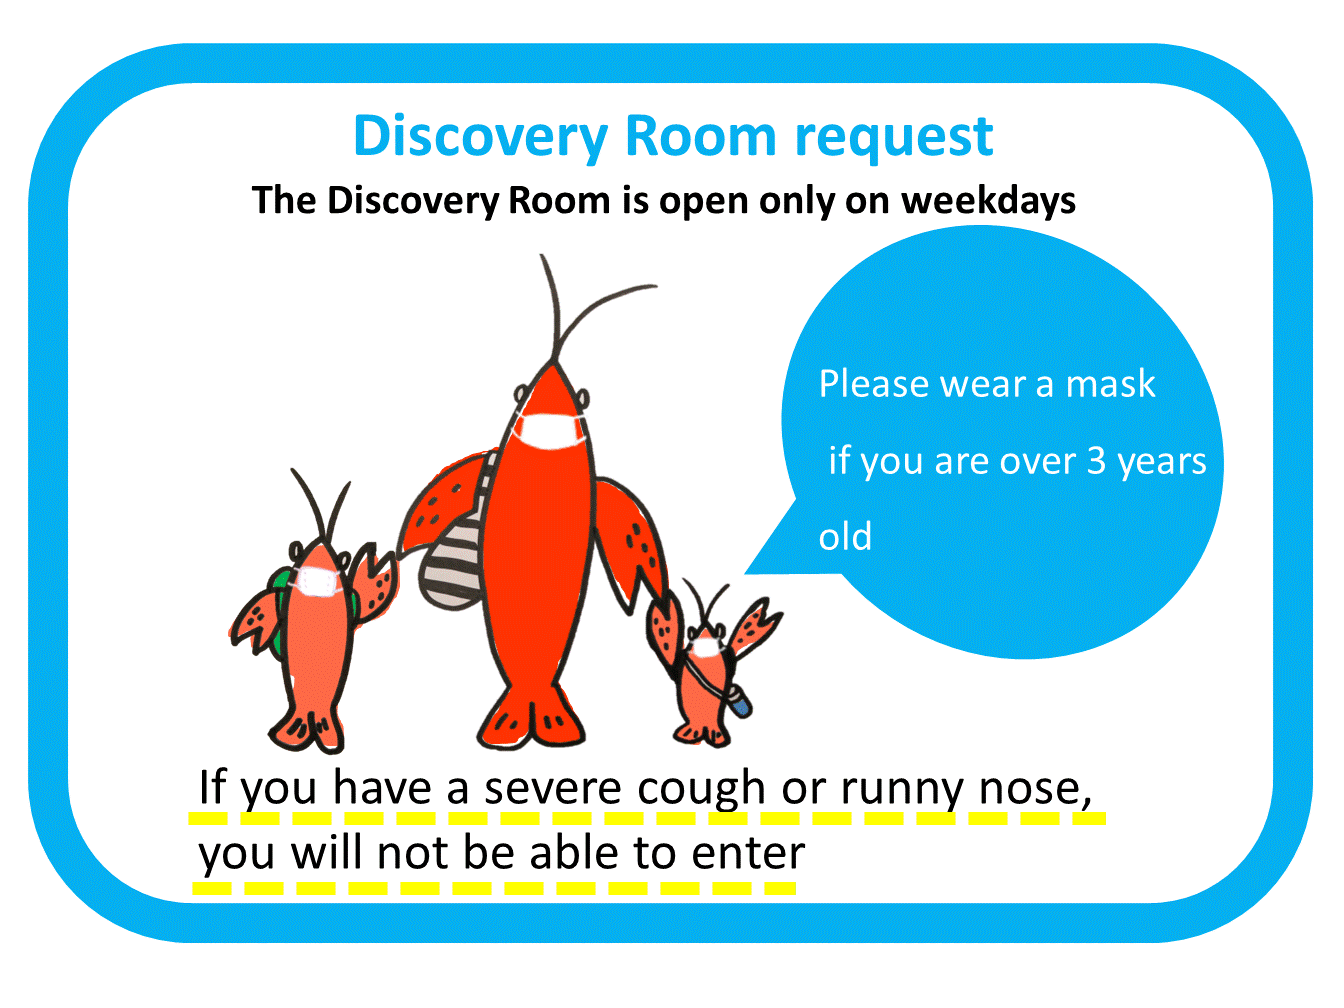 The Discovery Room only open on weekdays. Please wear a mask.